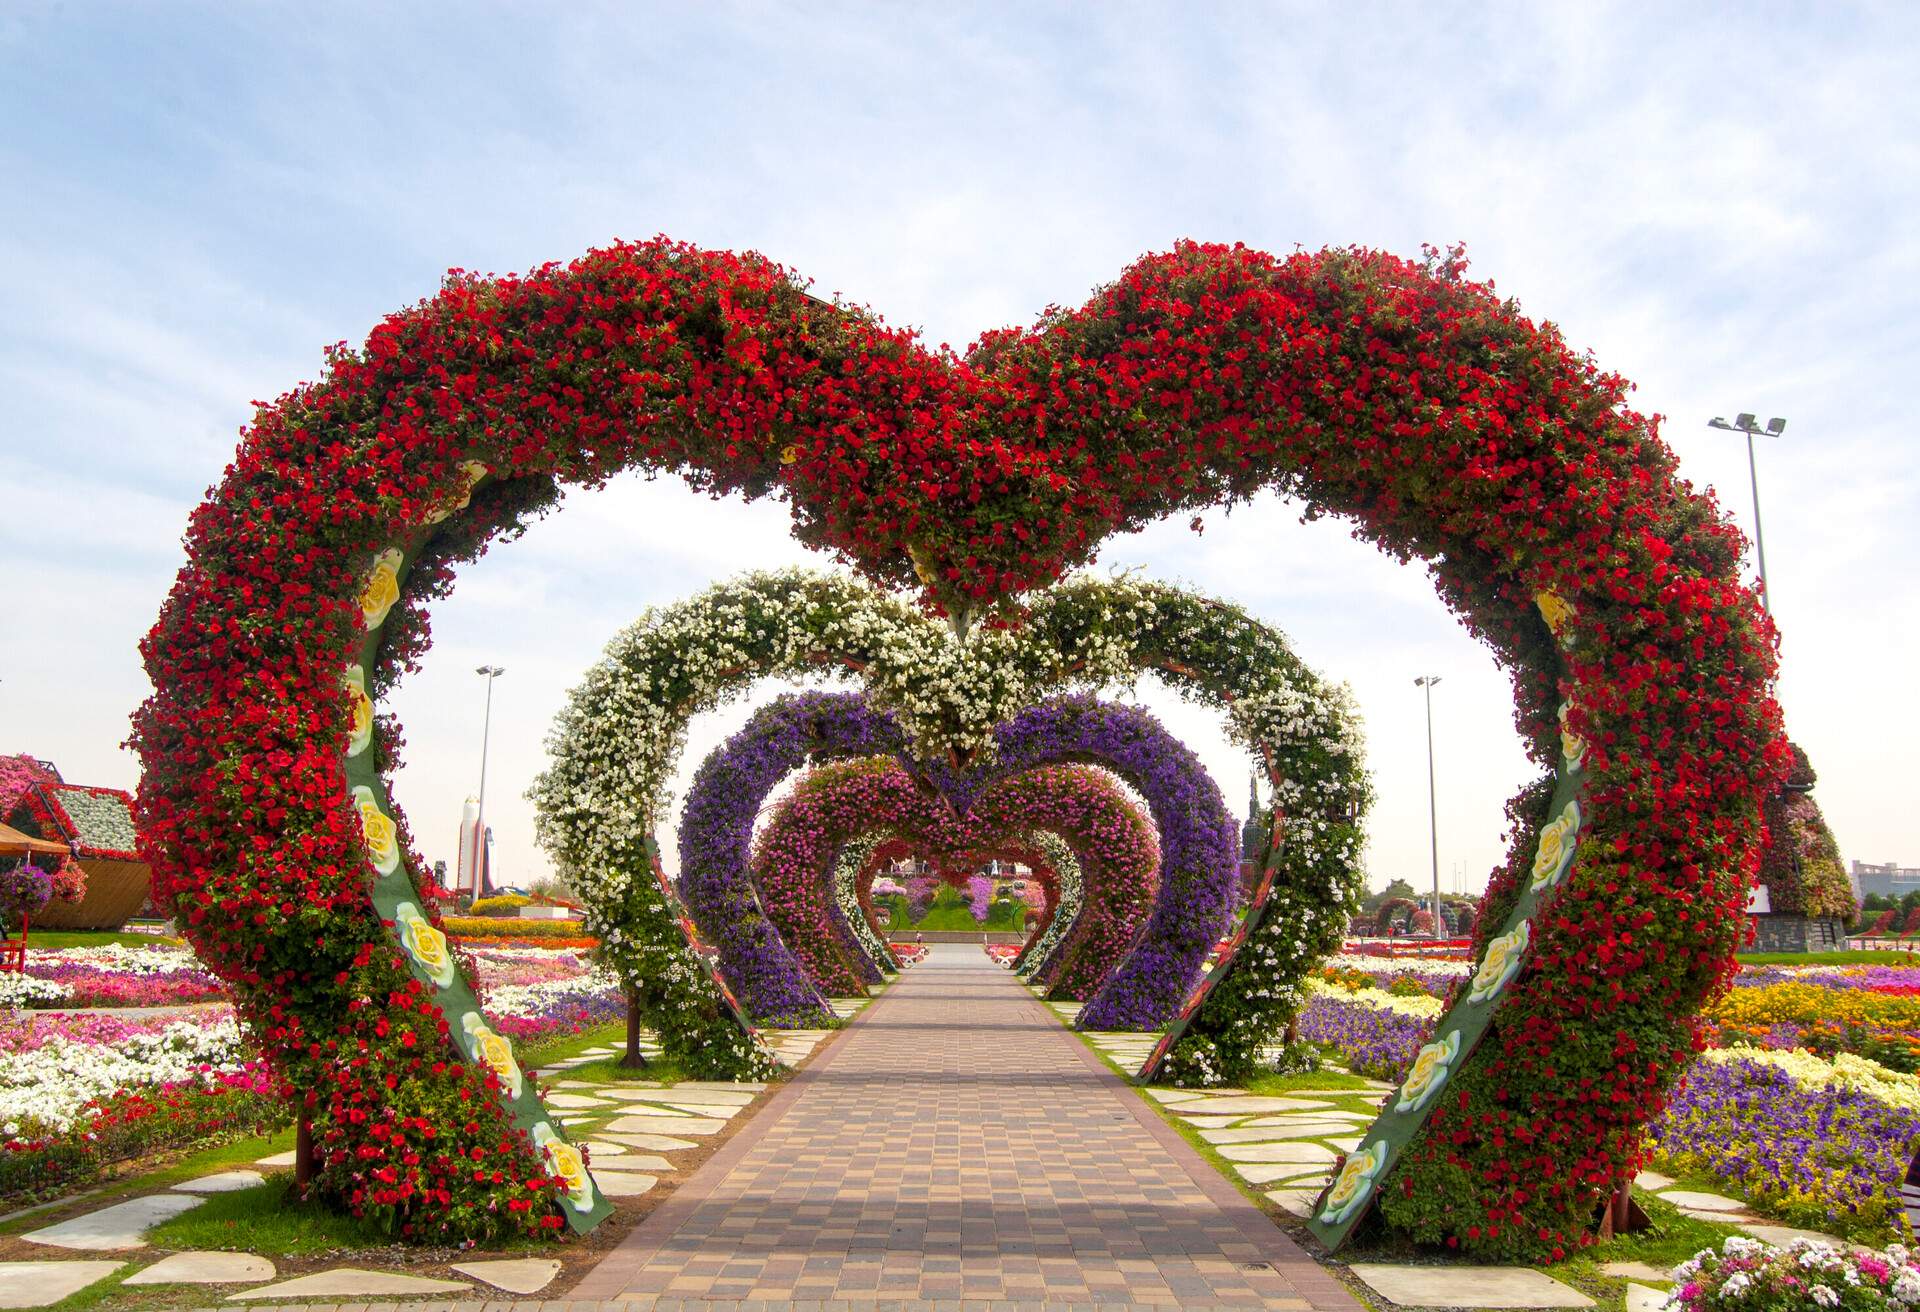 Miracle Garden, Dubai miracle garden is famous for heart shape installation. They collect flower all across world and make innovation out of the flower.